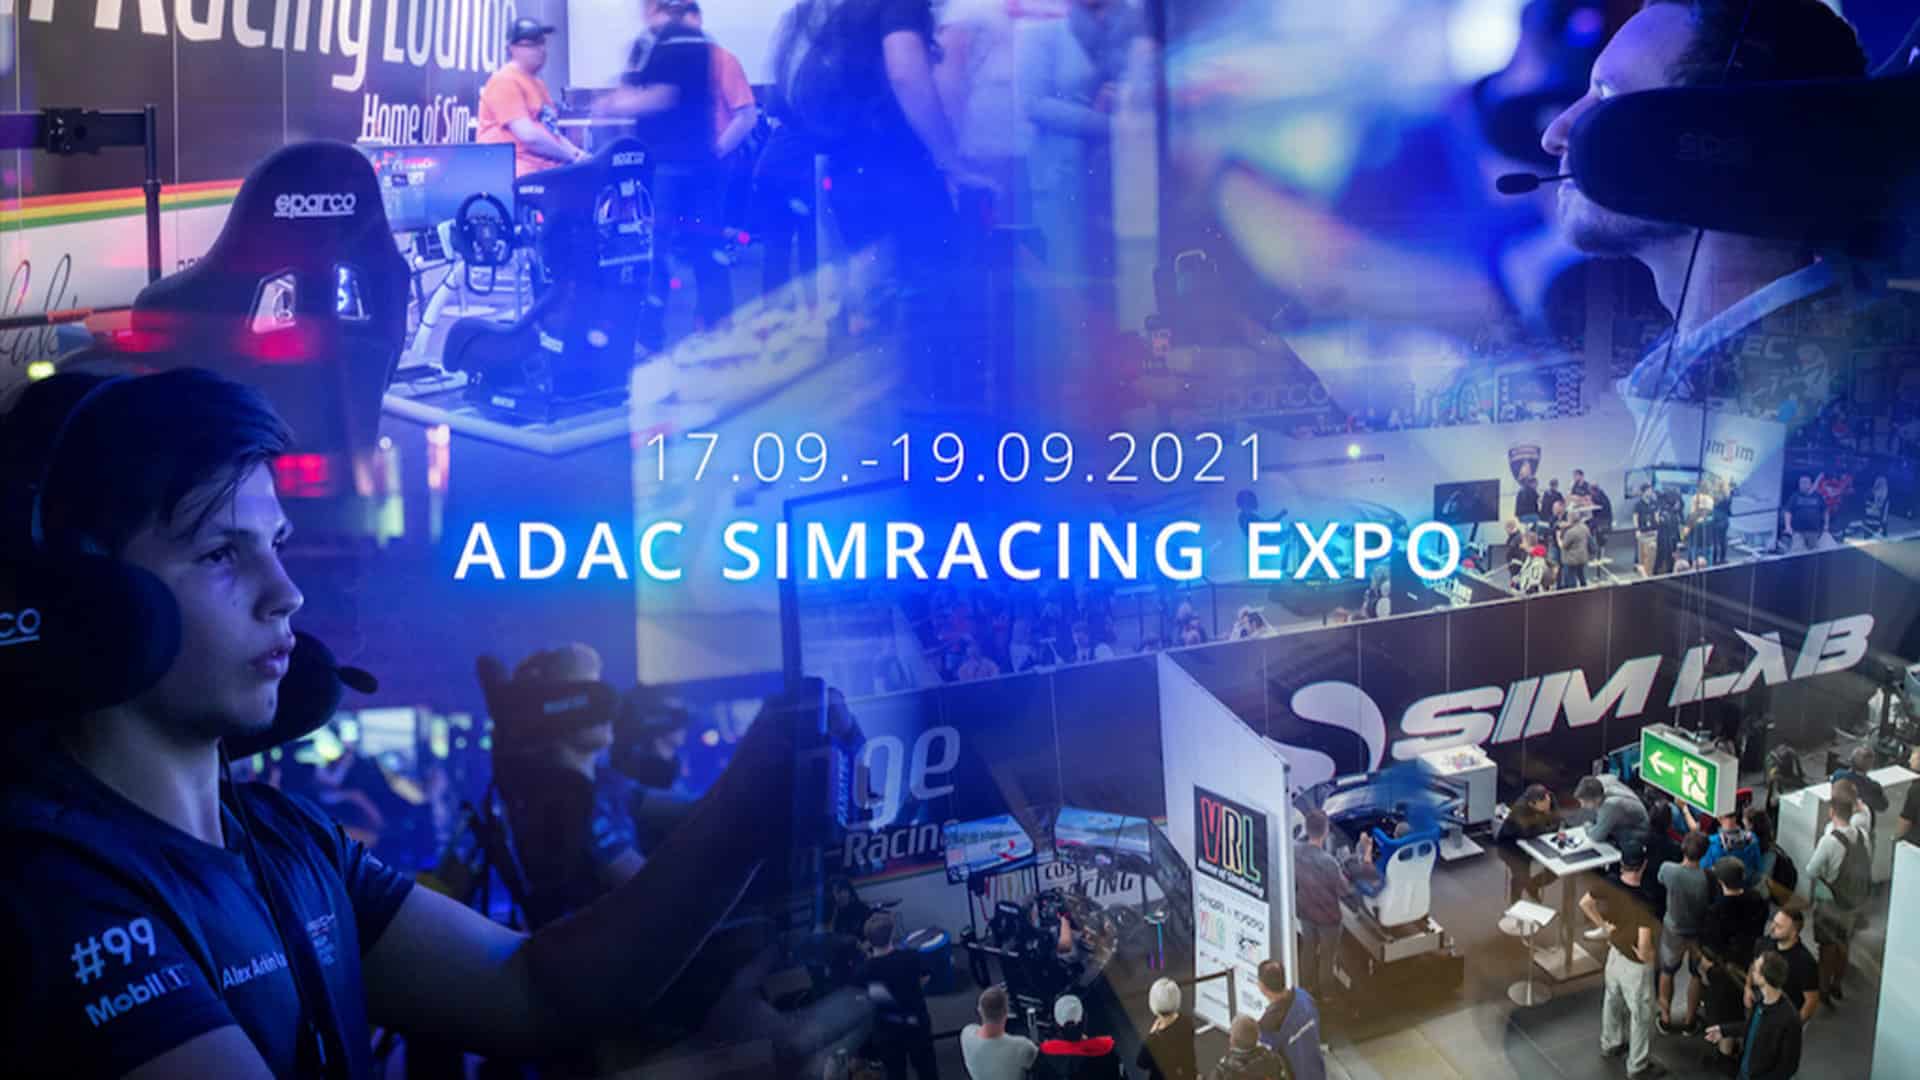 The ADAC SimRacing Expo happens next month at the Nürburgring